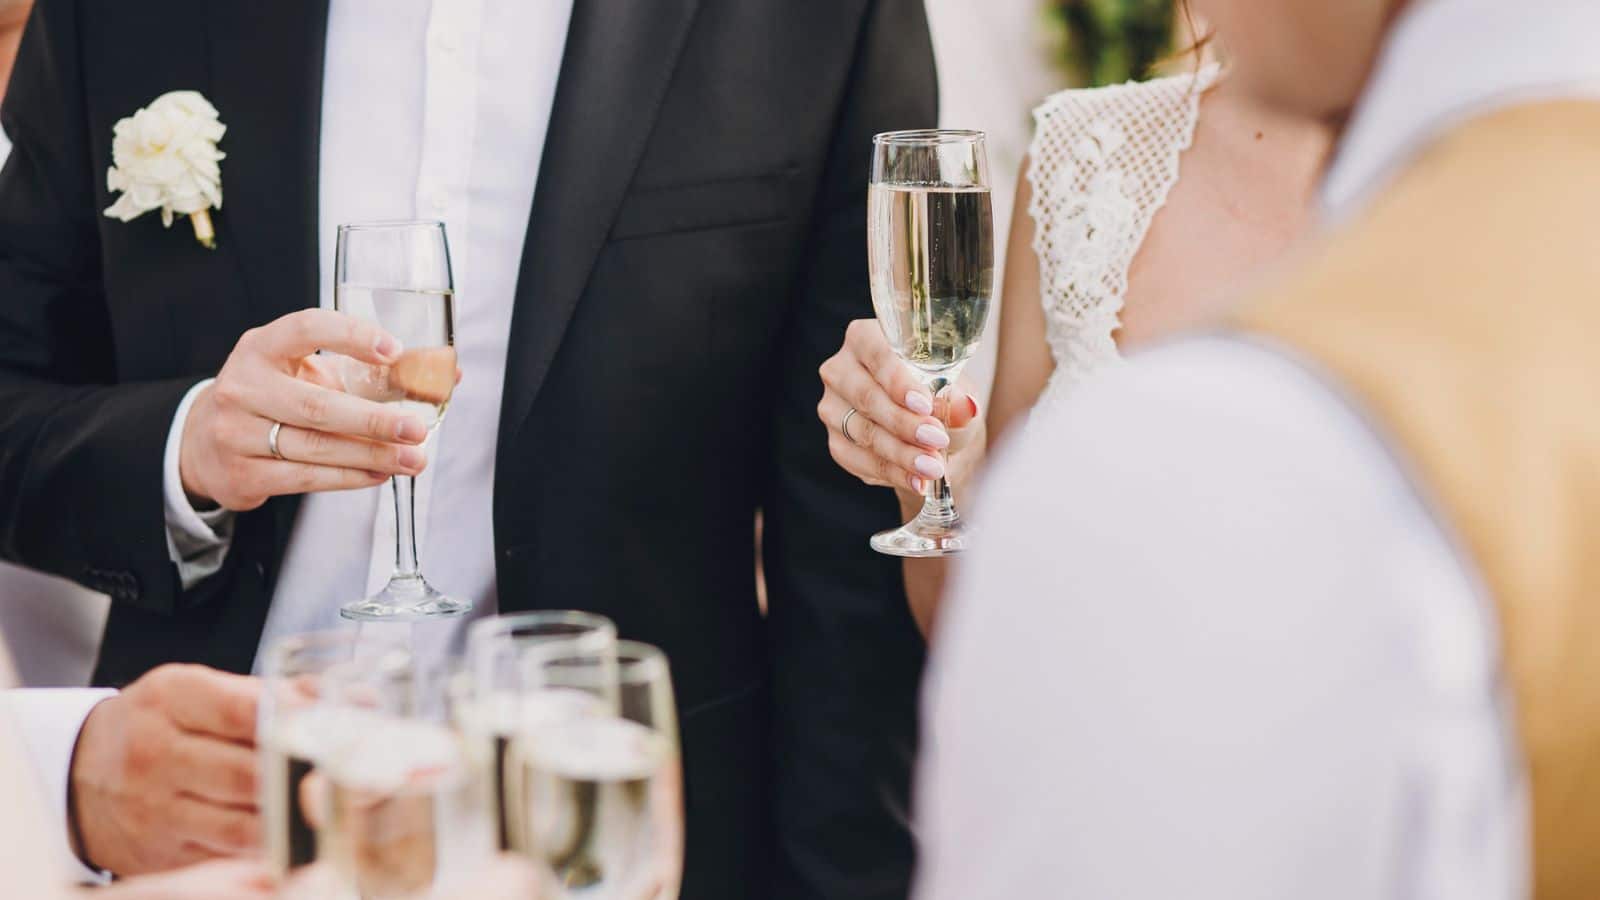 12 Rules Everyone Should Have At Their Wedding